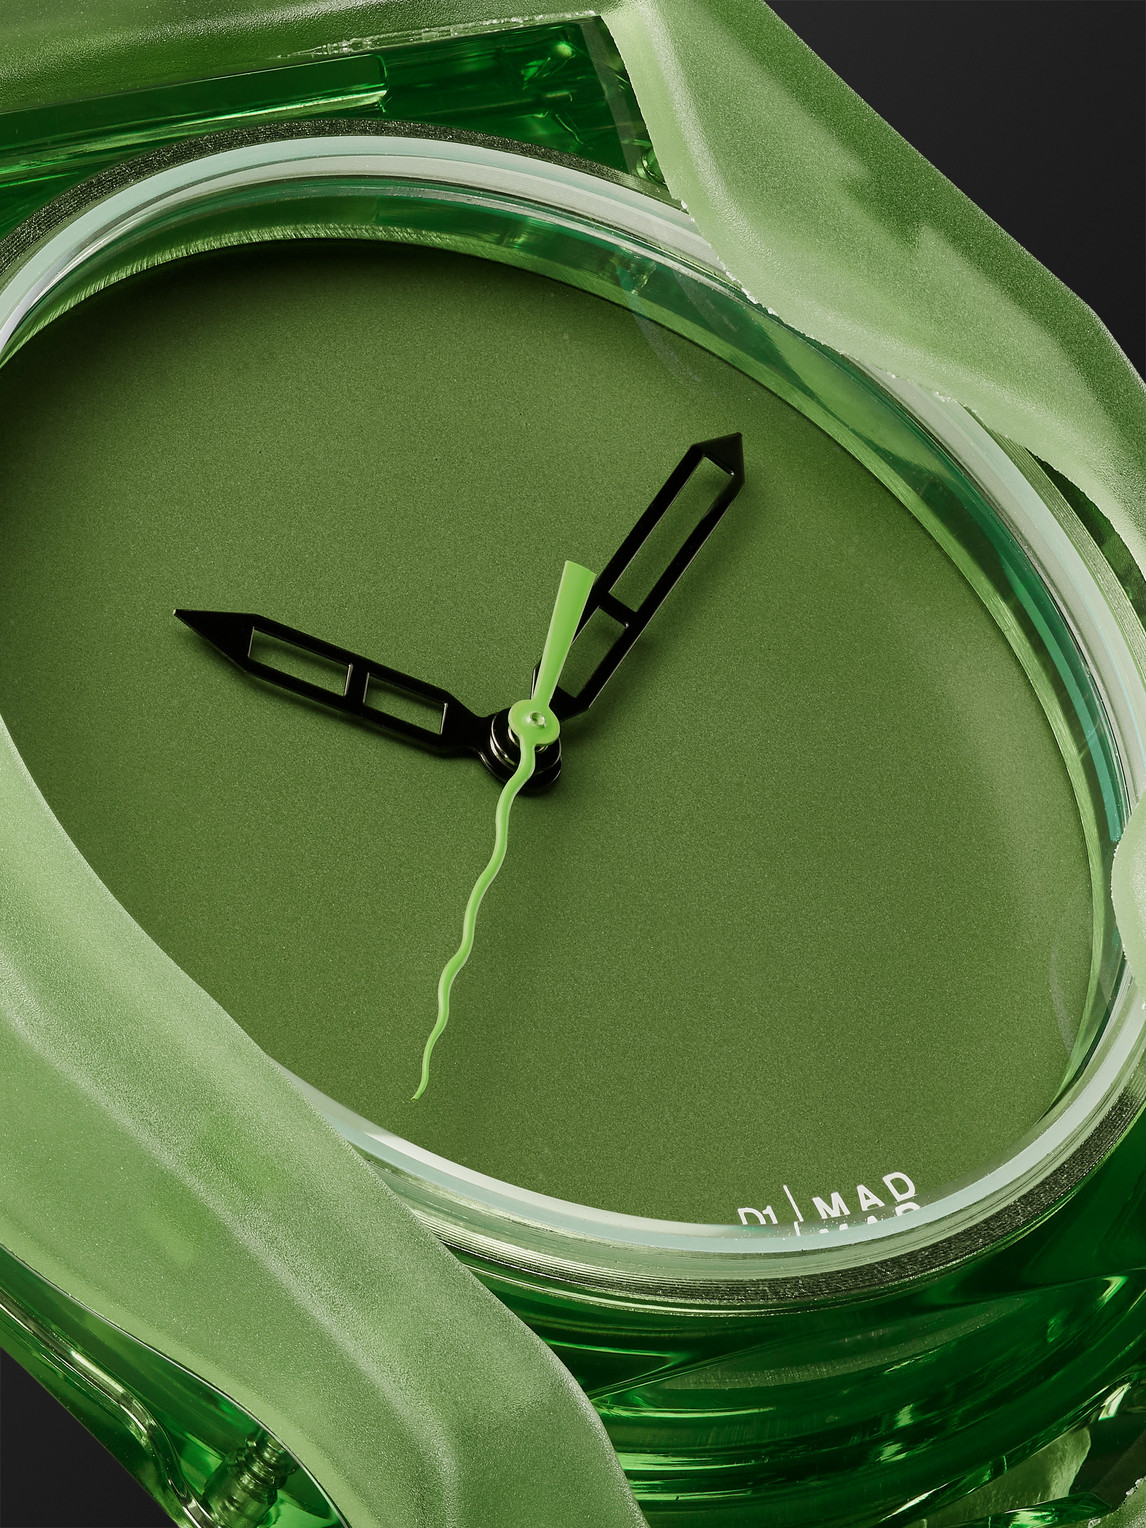 Shop Mad Paris D1 Milano Virdis Limited Edition 40mm Tpu And Nylon Watch, Ref. No. Mdrj05 In Green